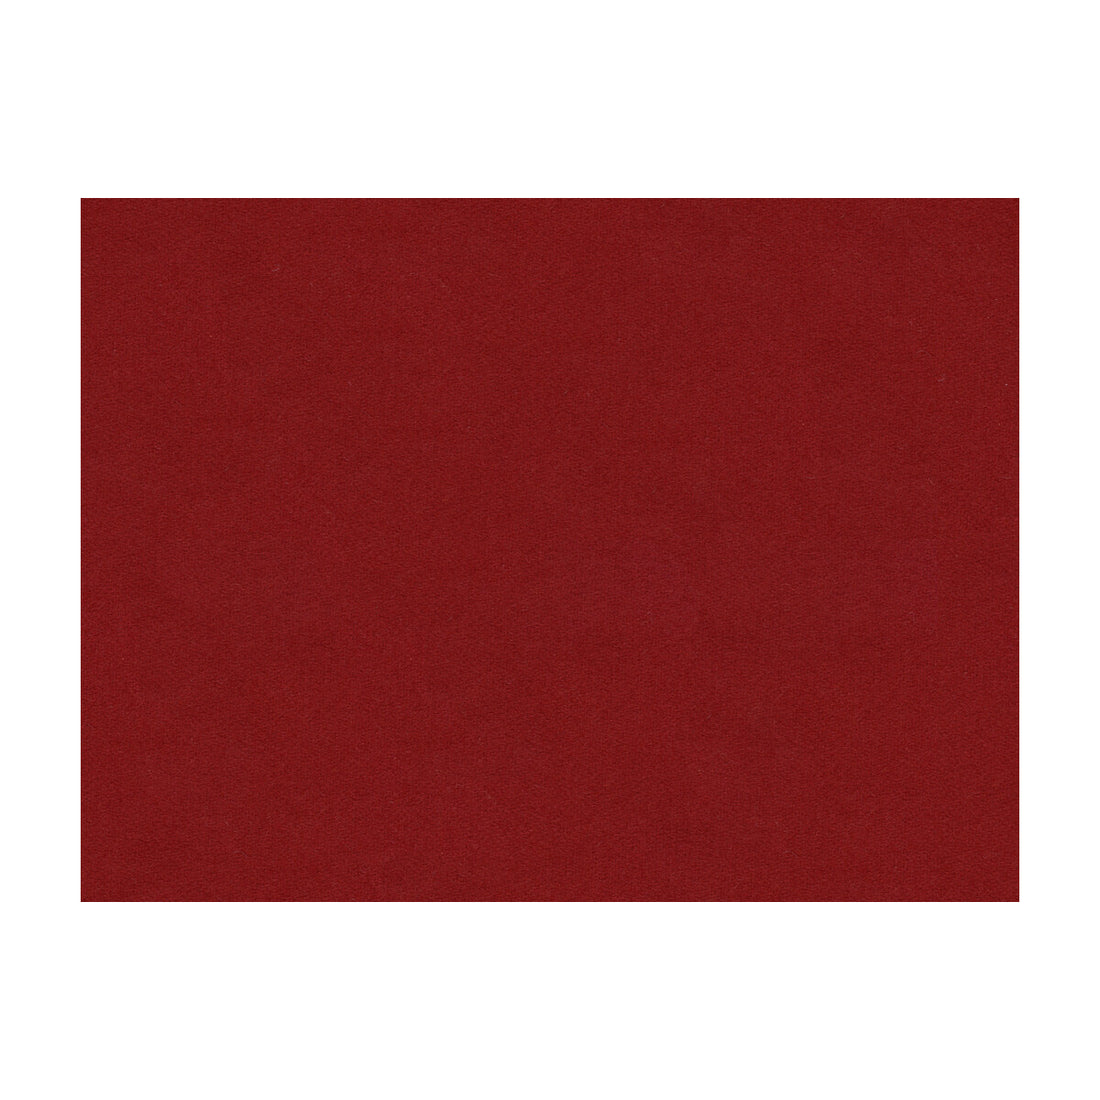 Chevalier Wool fabric in pomegranate color - pattern 8013149.919.0 - by Brunschwig &amp; Fils